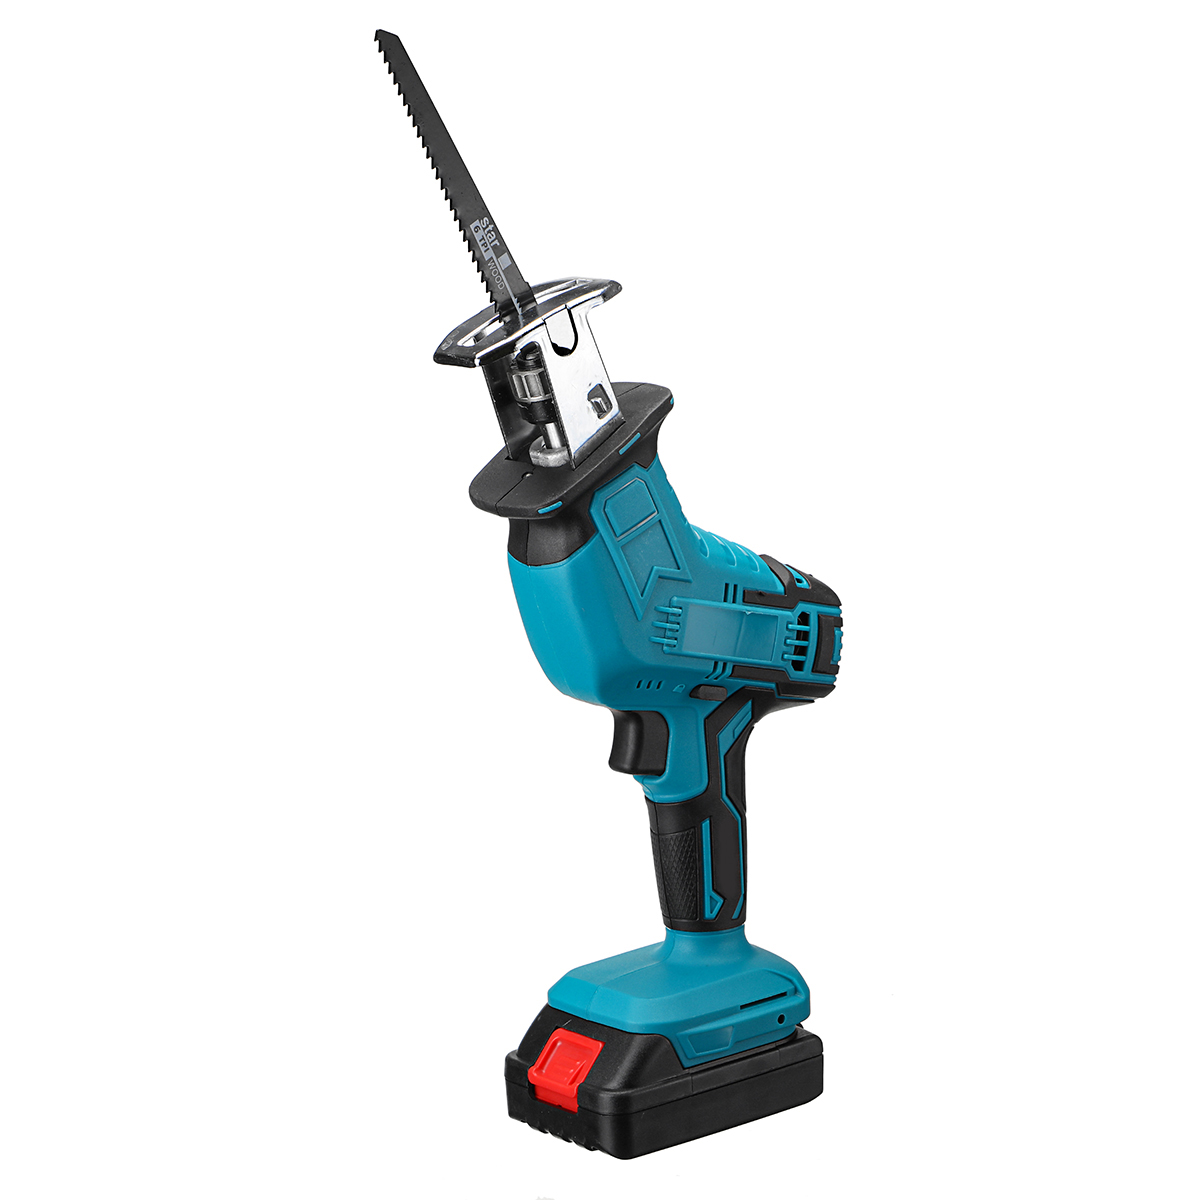 21V-Cordless-Reciprocating-Saw-Electric-Sabre-Saw-Woodworking-Wood-Metal-Cutting-With-1-Battery-1774259-4